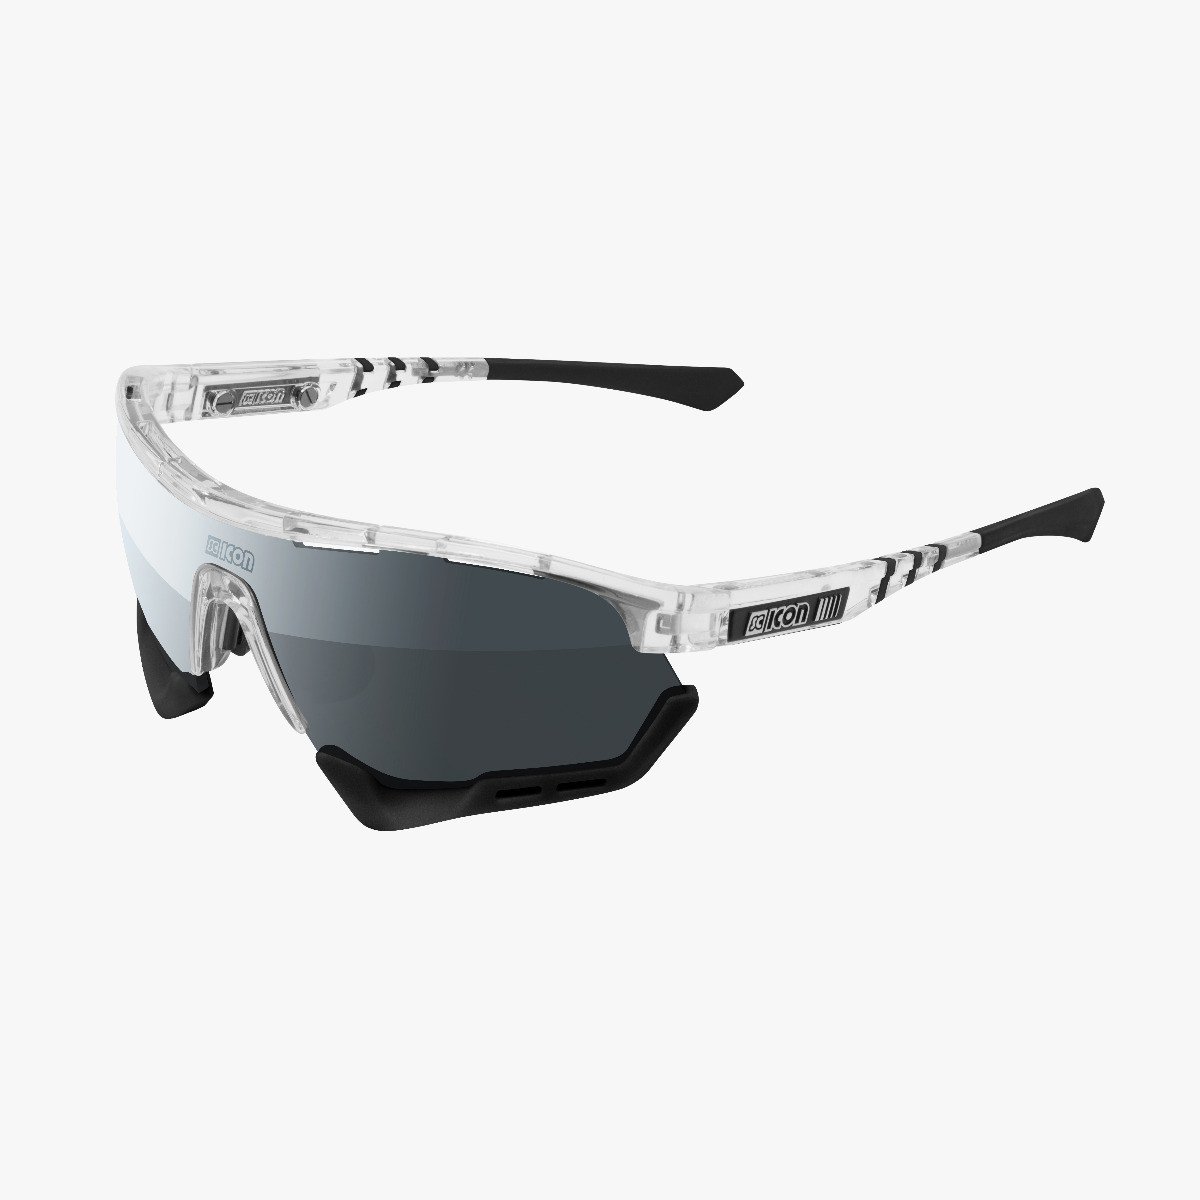 Scicon Sports | Aerotech Sport Cycling Performance Sunglasses - Crystal / Silver - EY13080705
